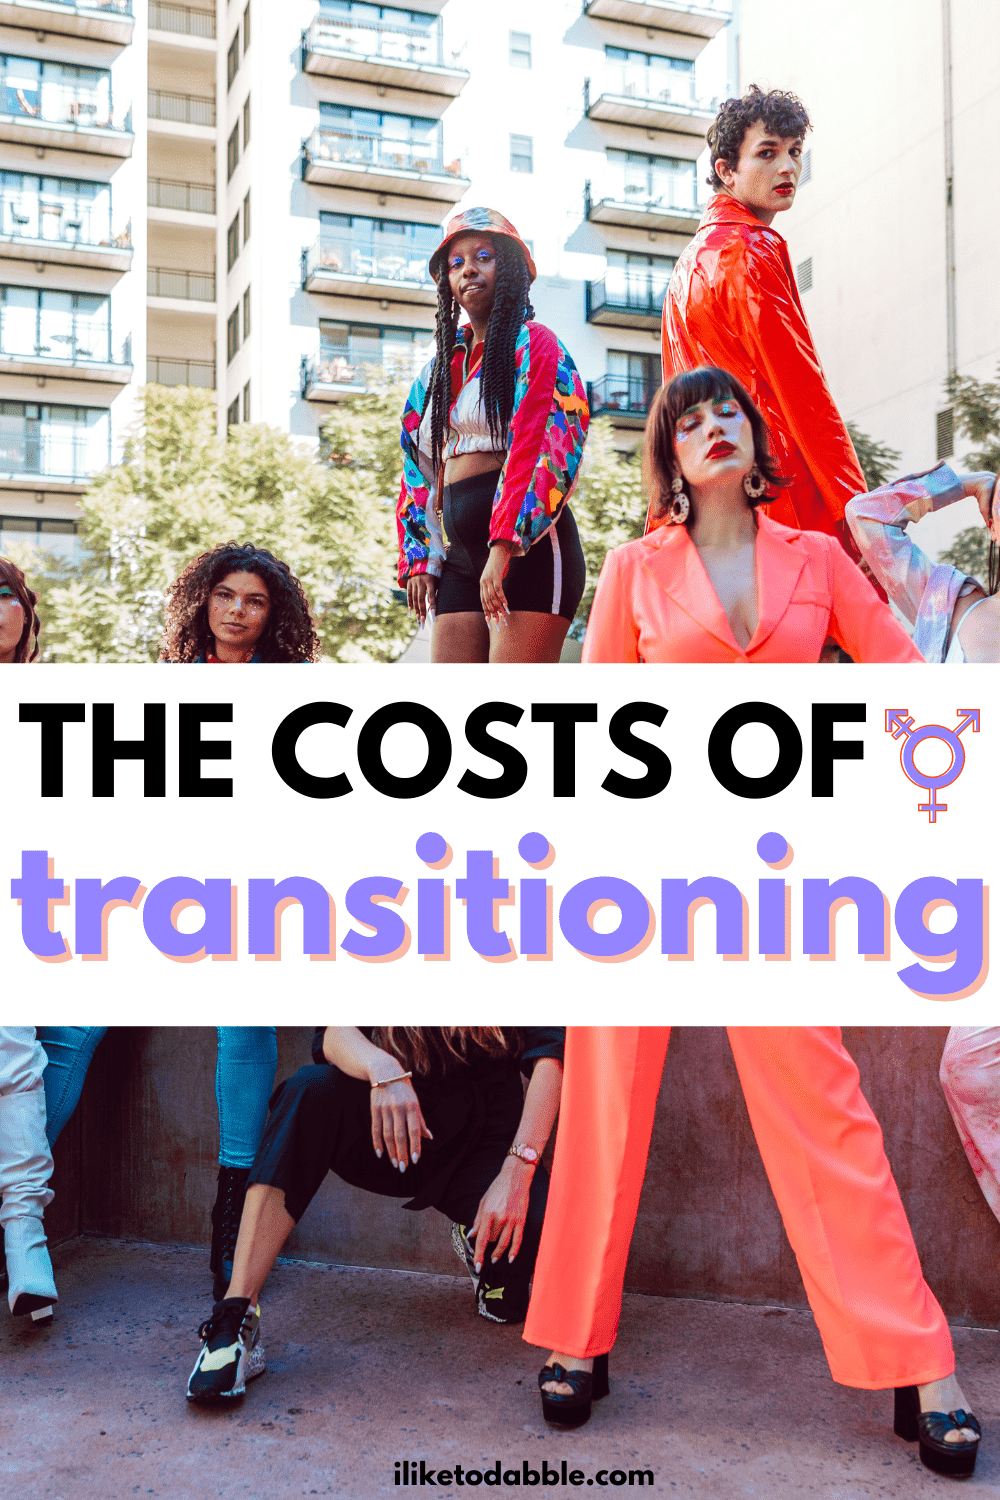 Costs of transitioning pinnable image of people expressing themselves in fashionable clothing with title text overlay that reads: the costs of transitioning